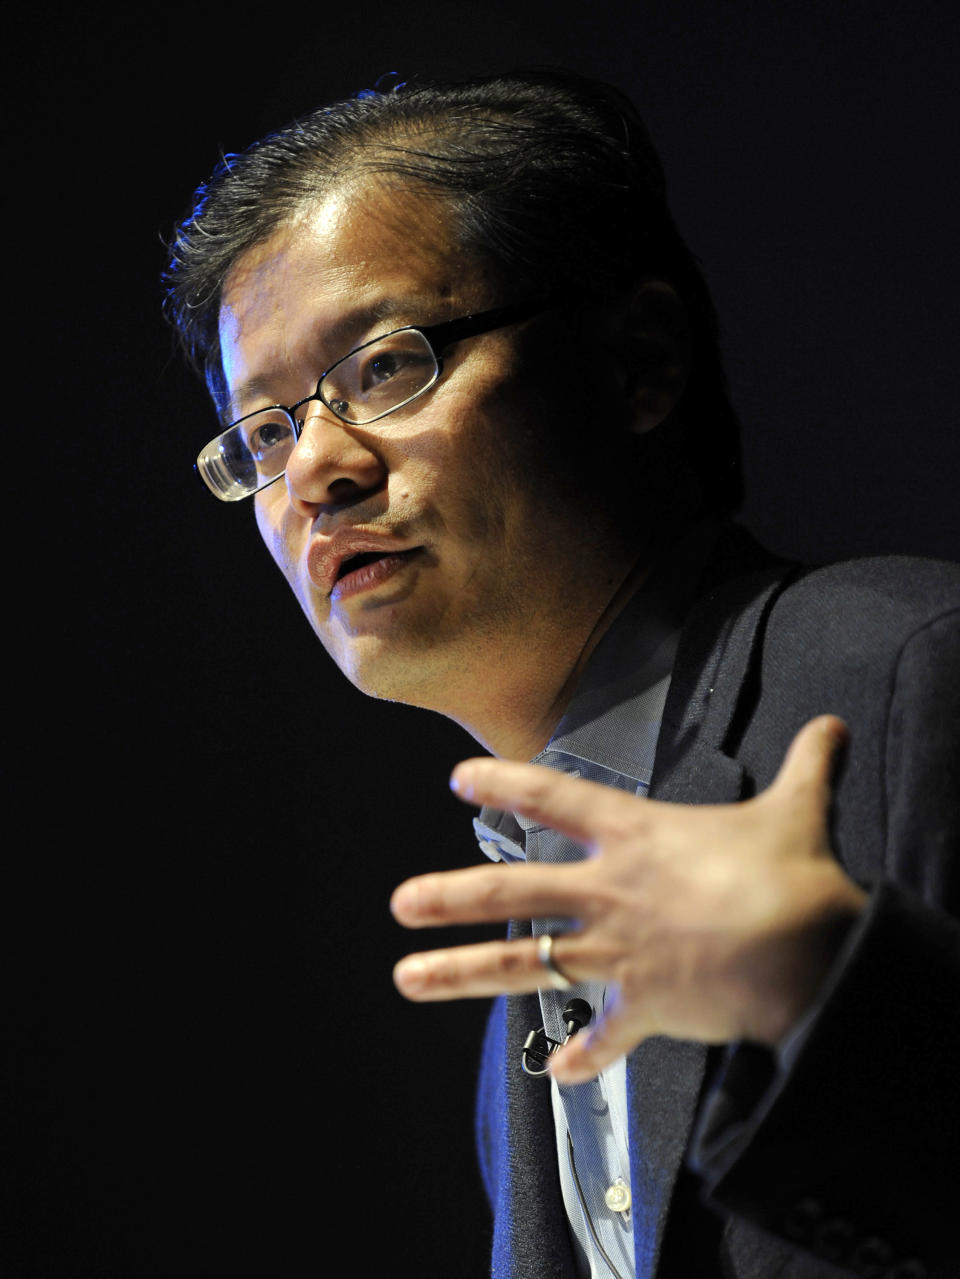 Yang, CEO and co-founder of Yahoo!, gestures as he addresses a conference in central London.